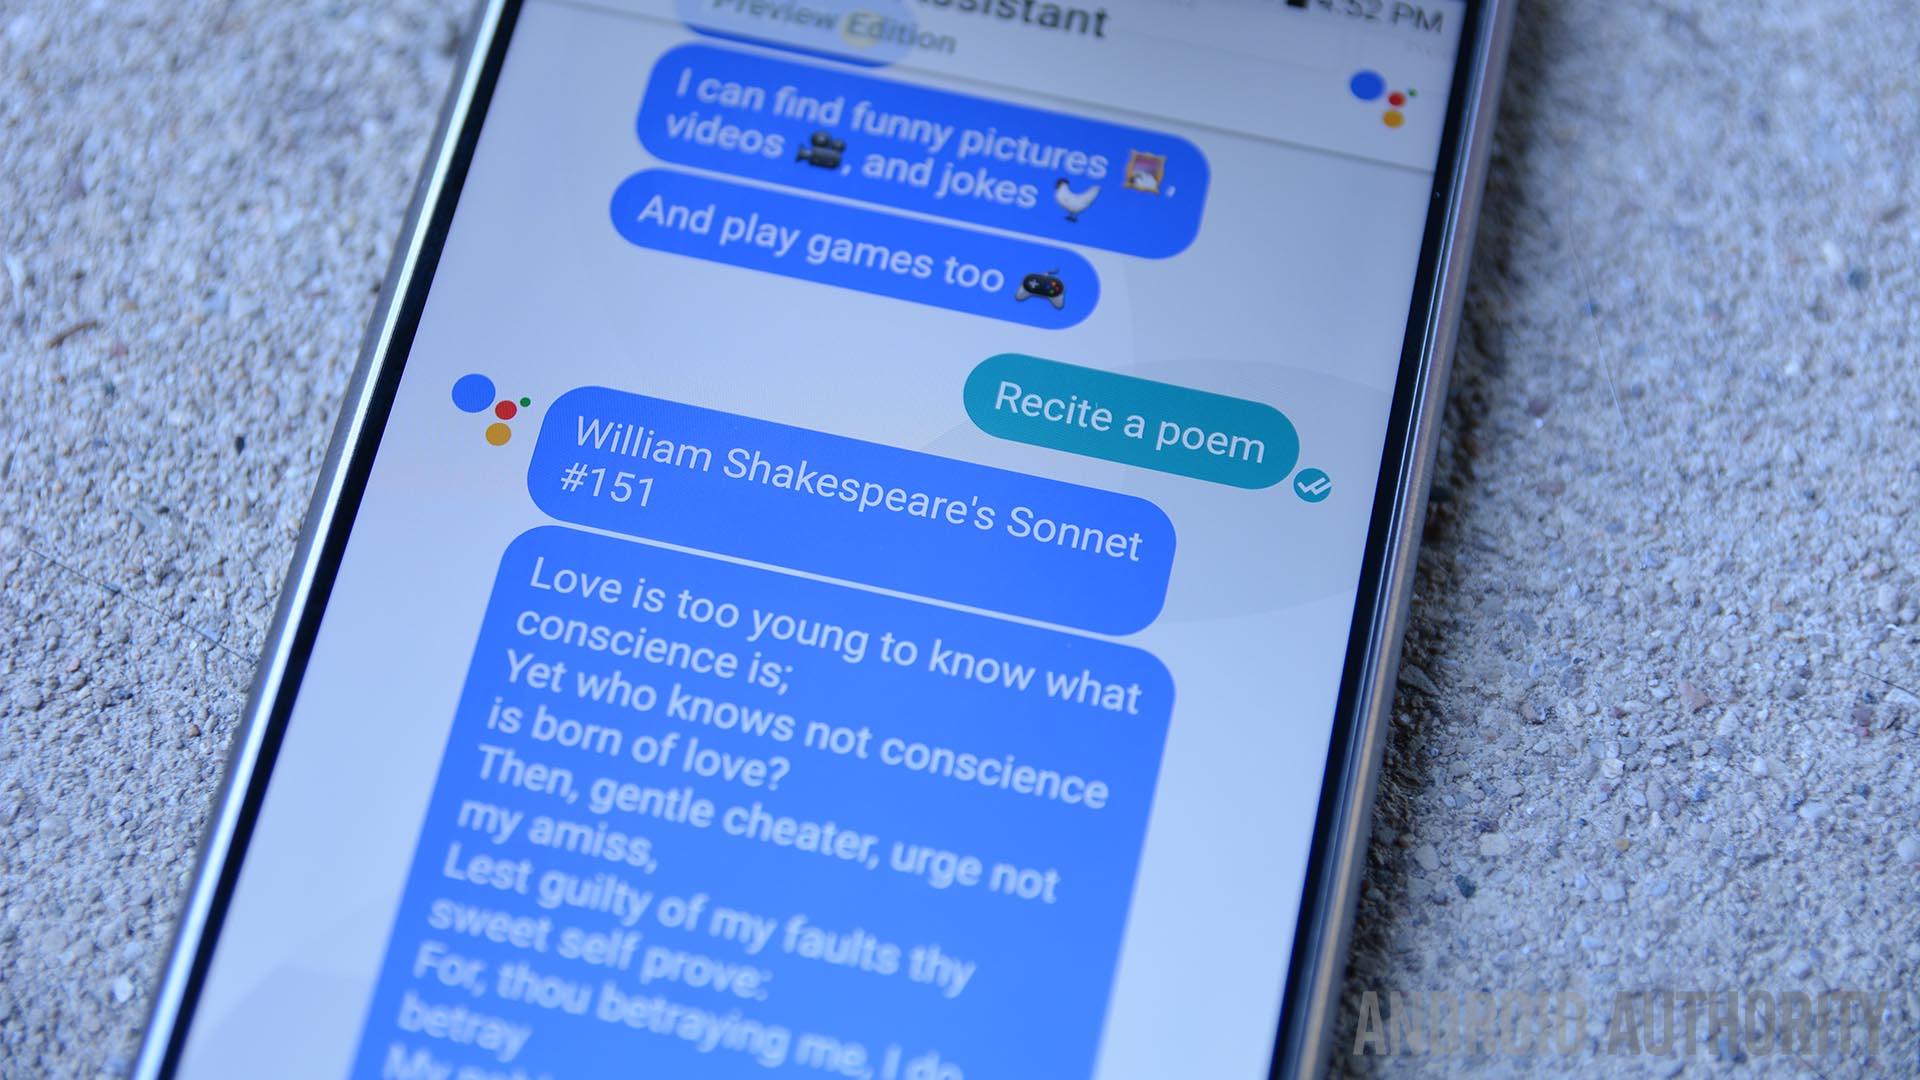 Play Games Using GOOGLE ASSISTANT